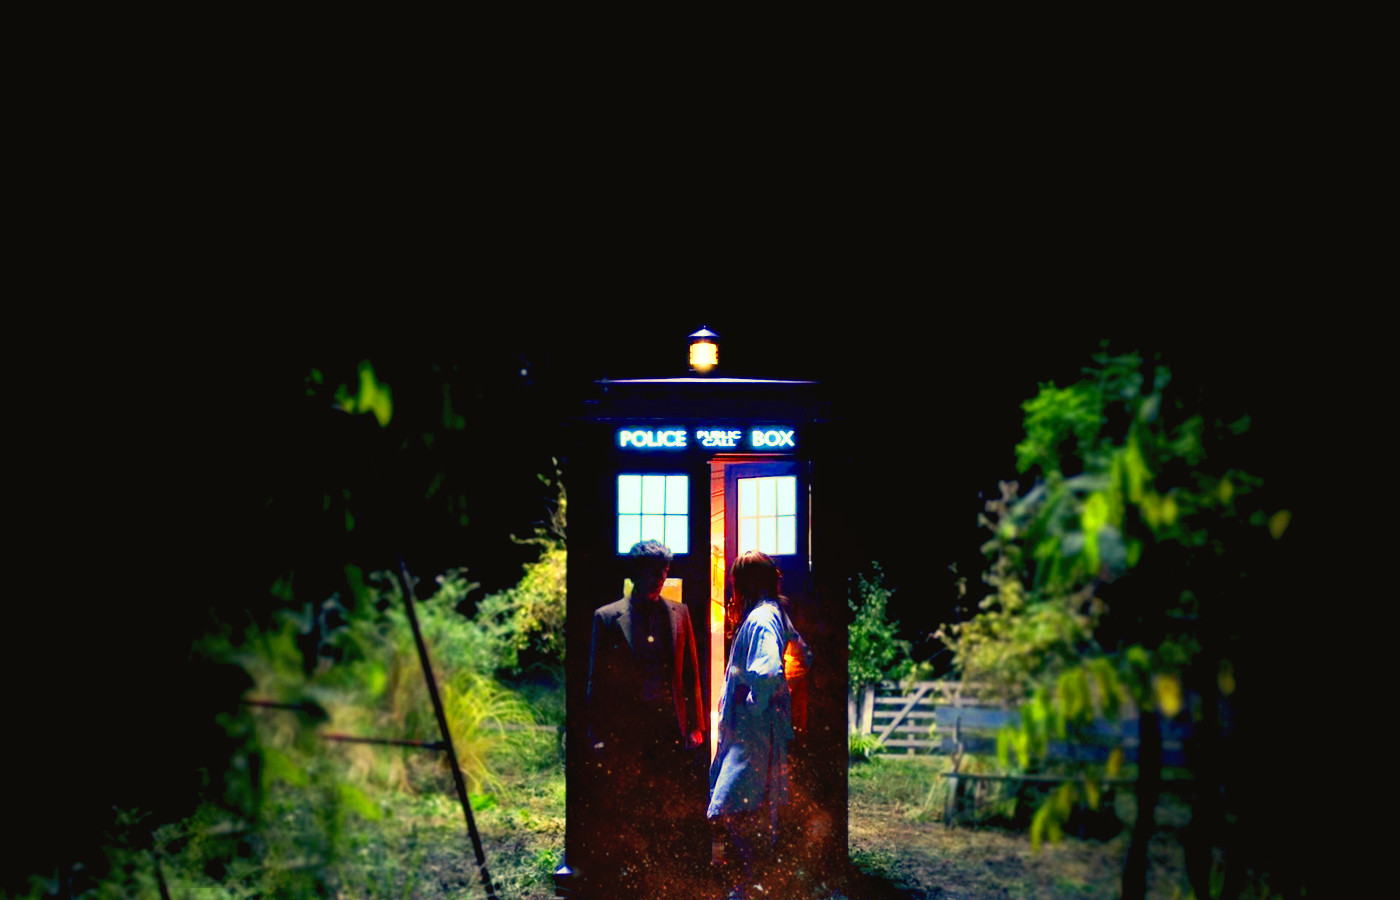 Doctor WHO Wallpaper